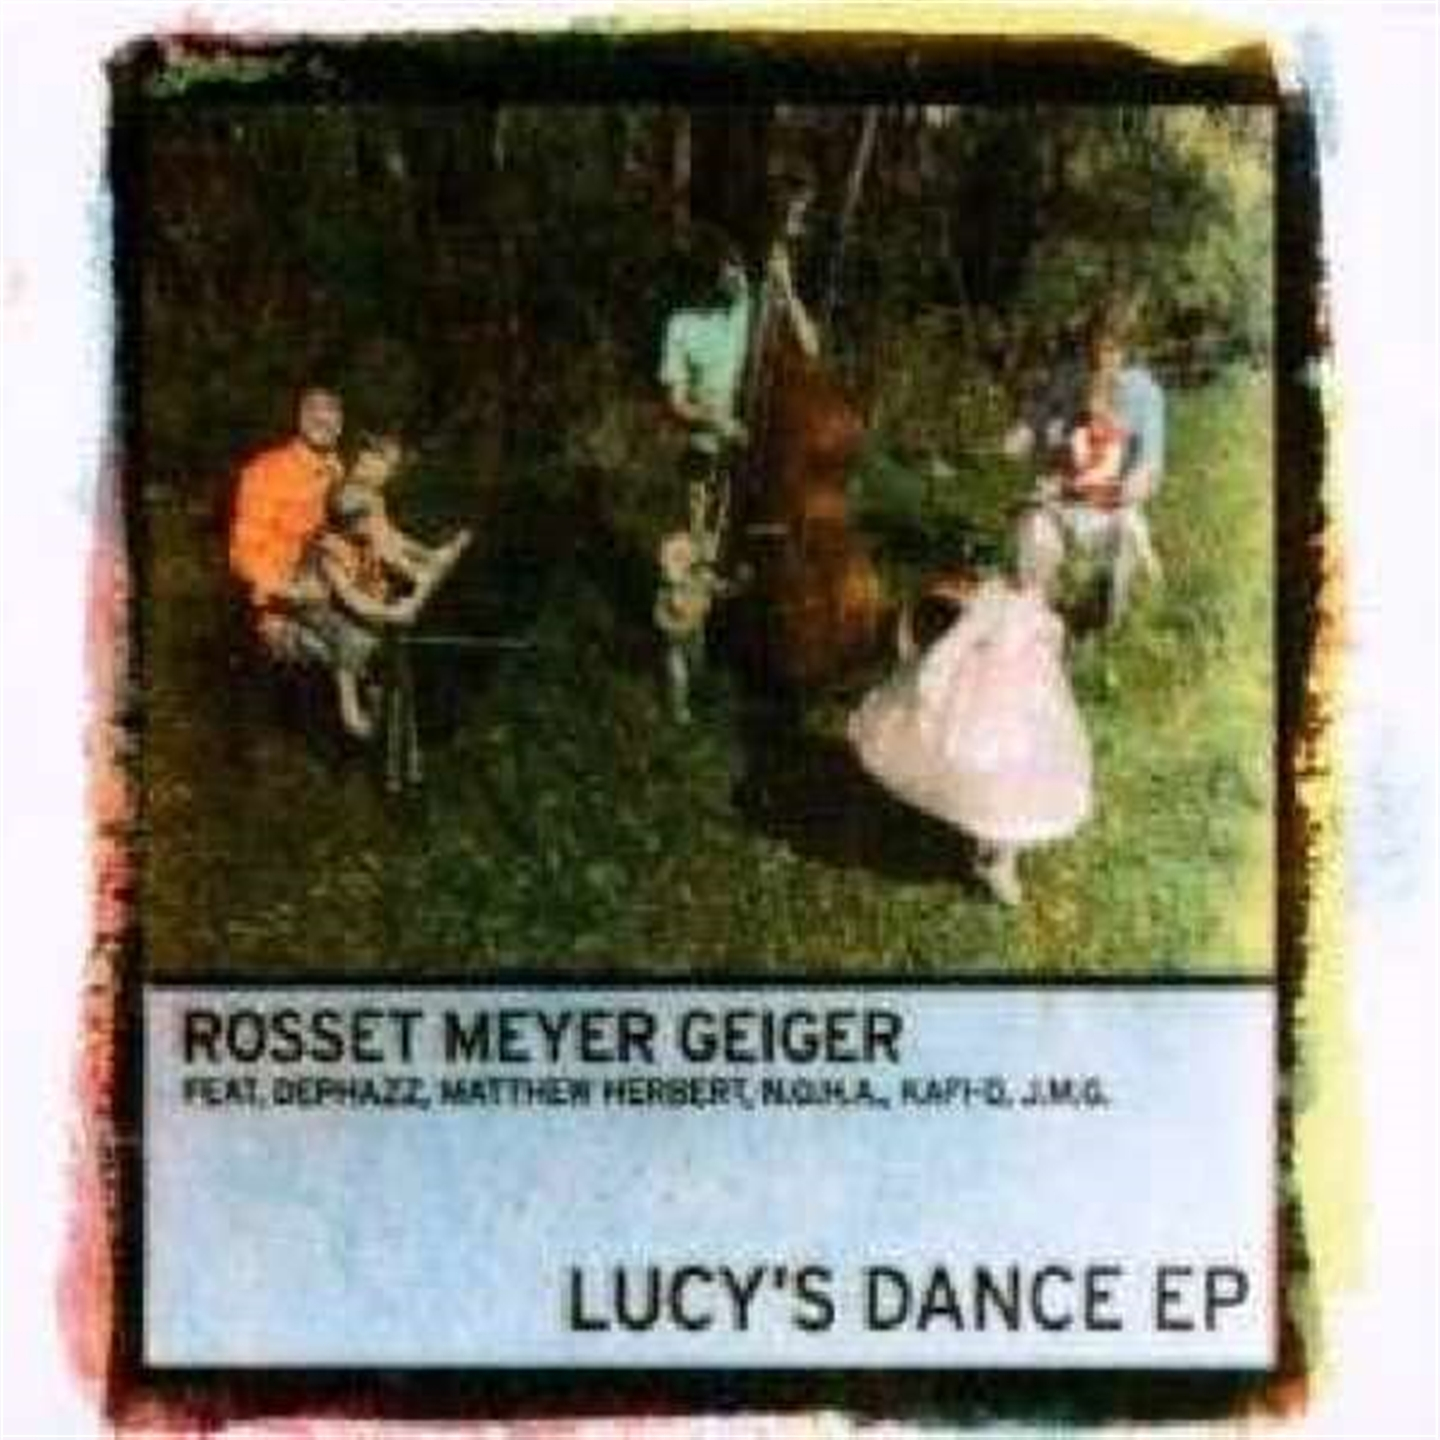 LUCY'S DANCE EP